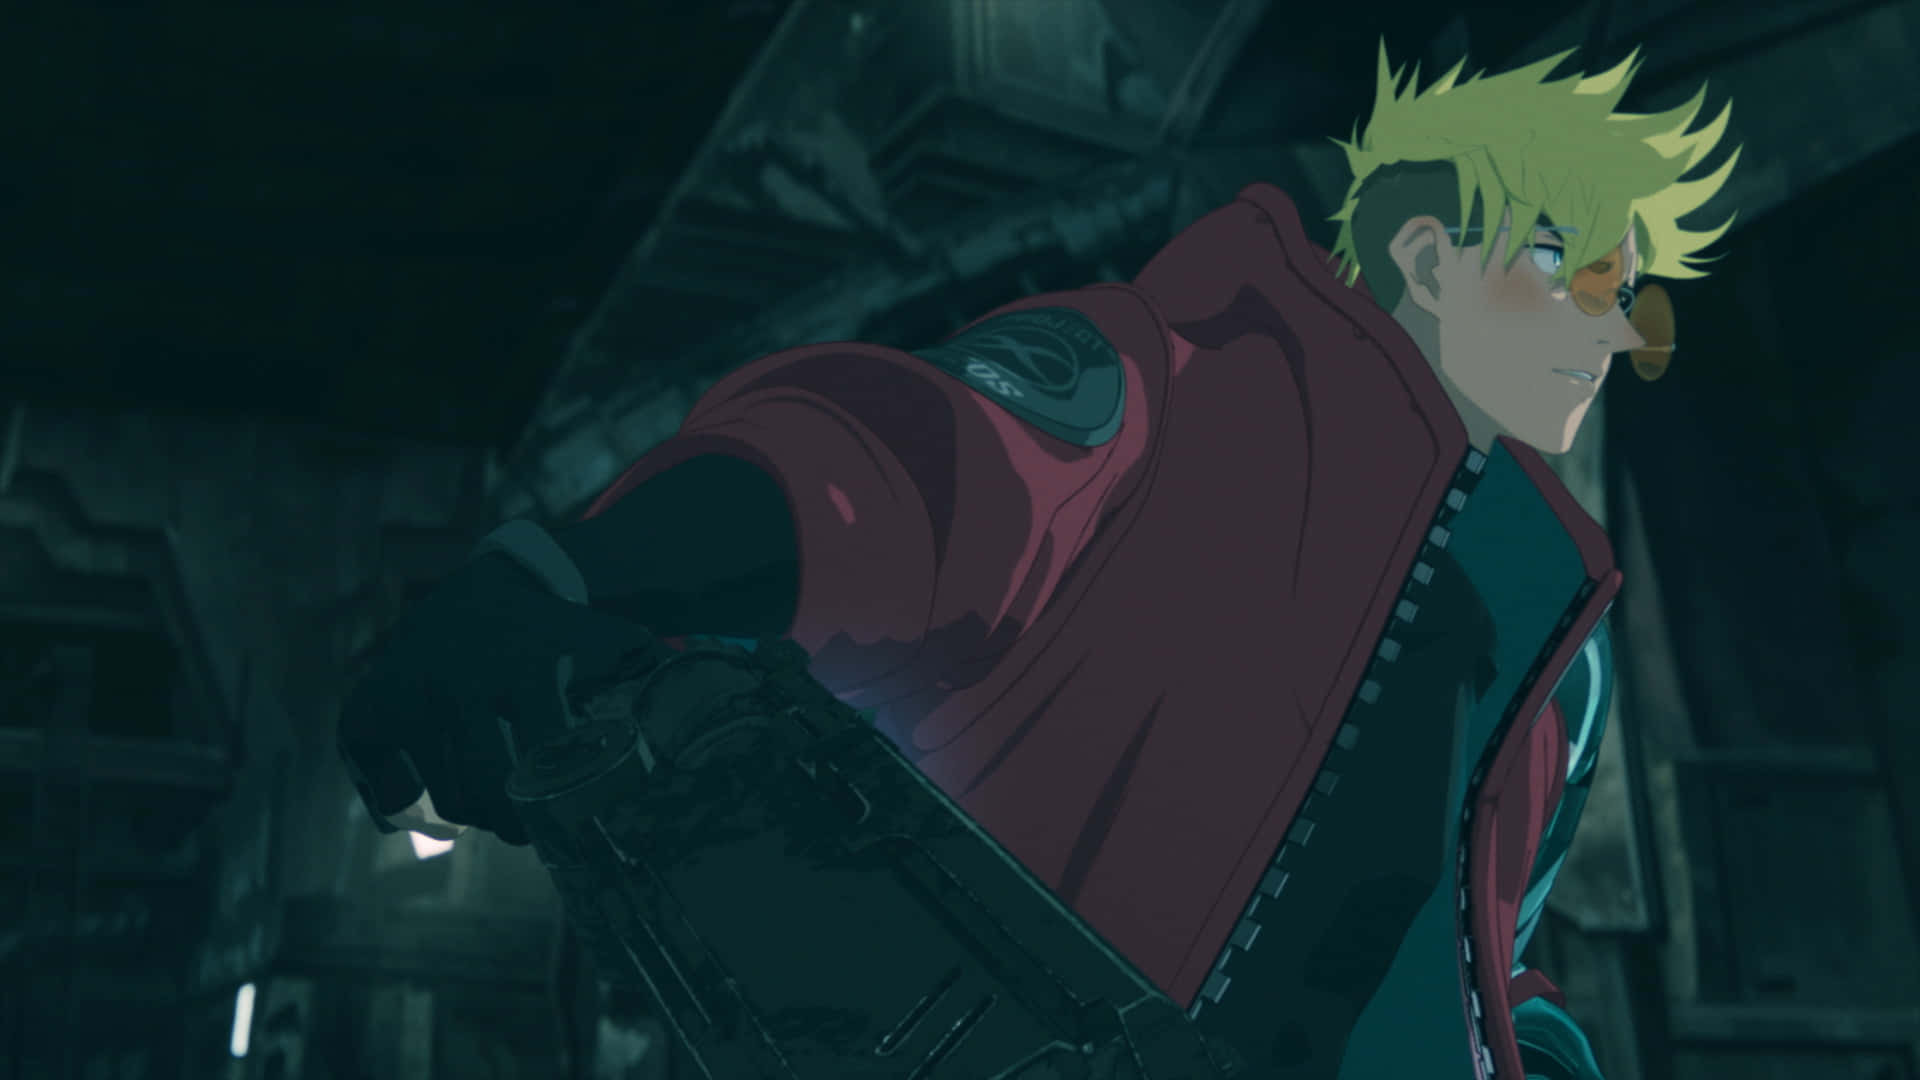 Vash the Stampede searches for answers in a vast desert